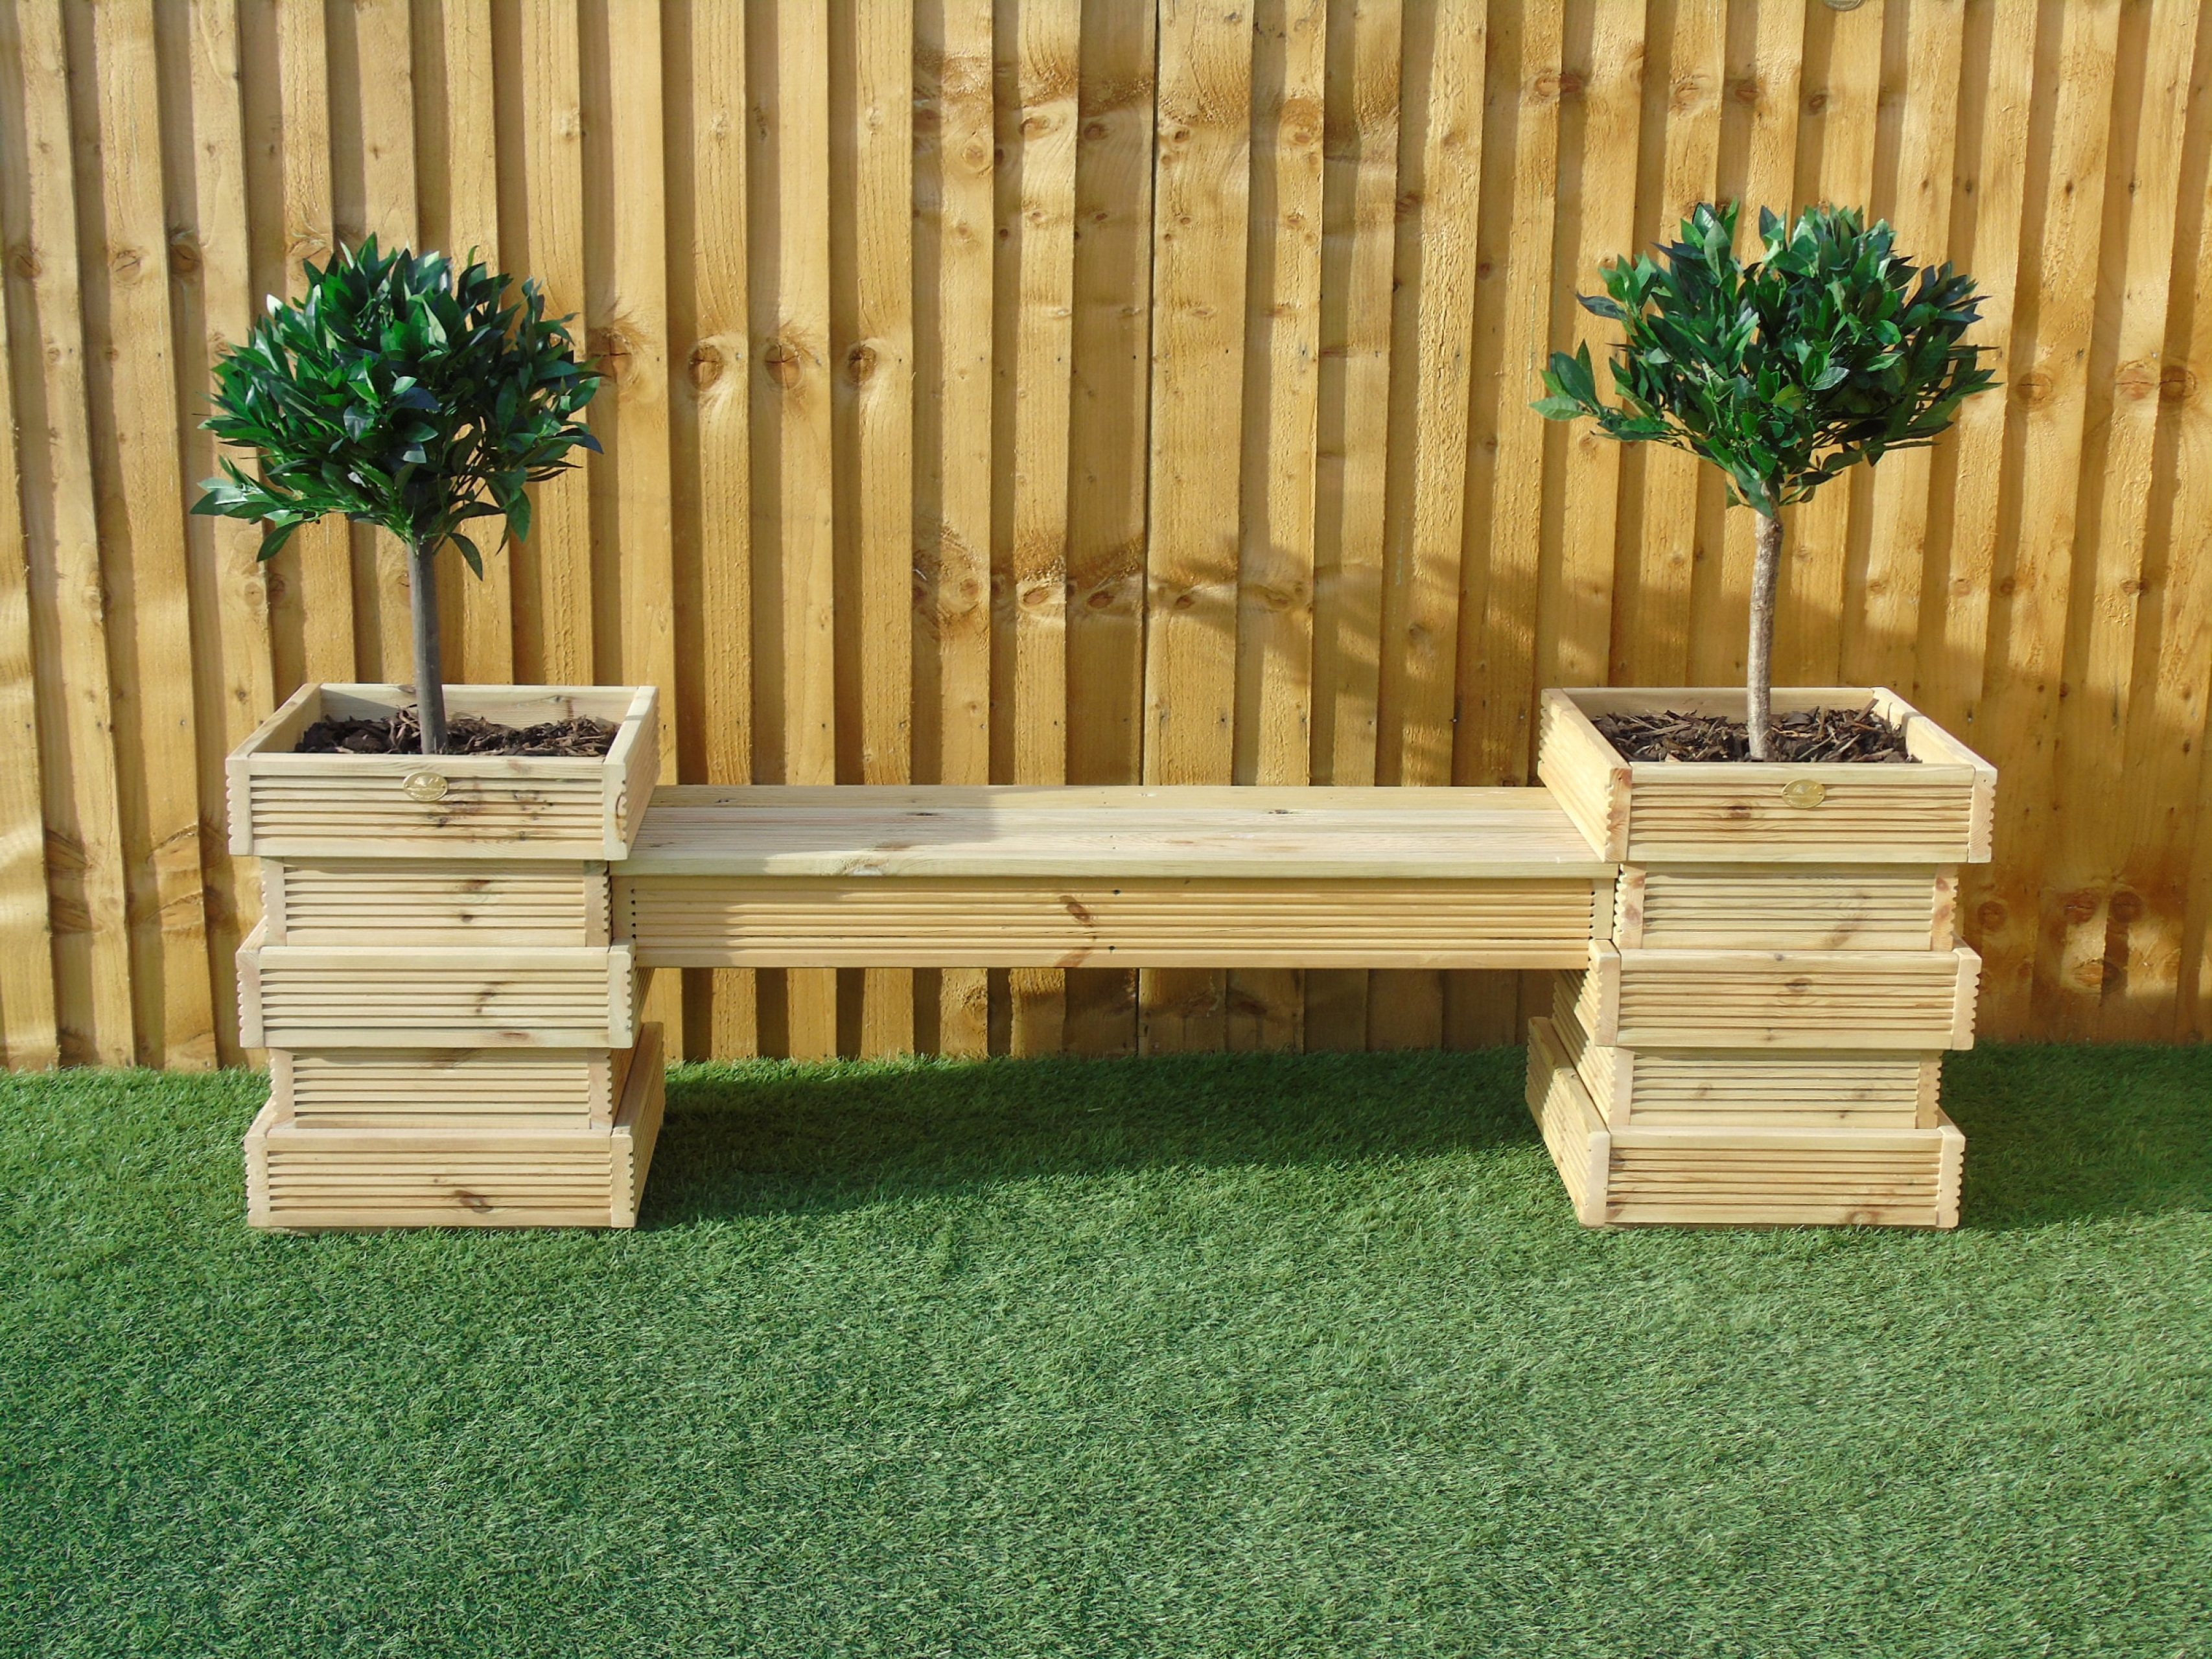 'Make Your Own' - Garden Seating Area Bench Set - Beehive 